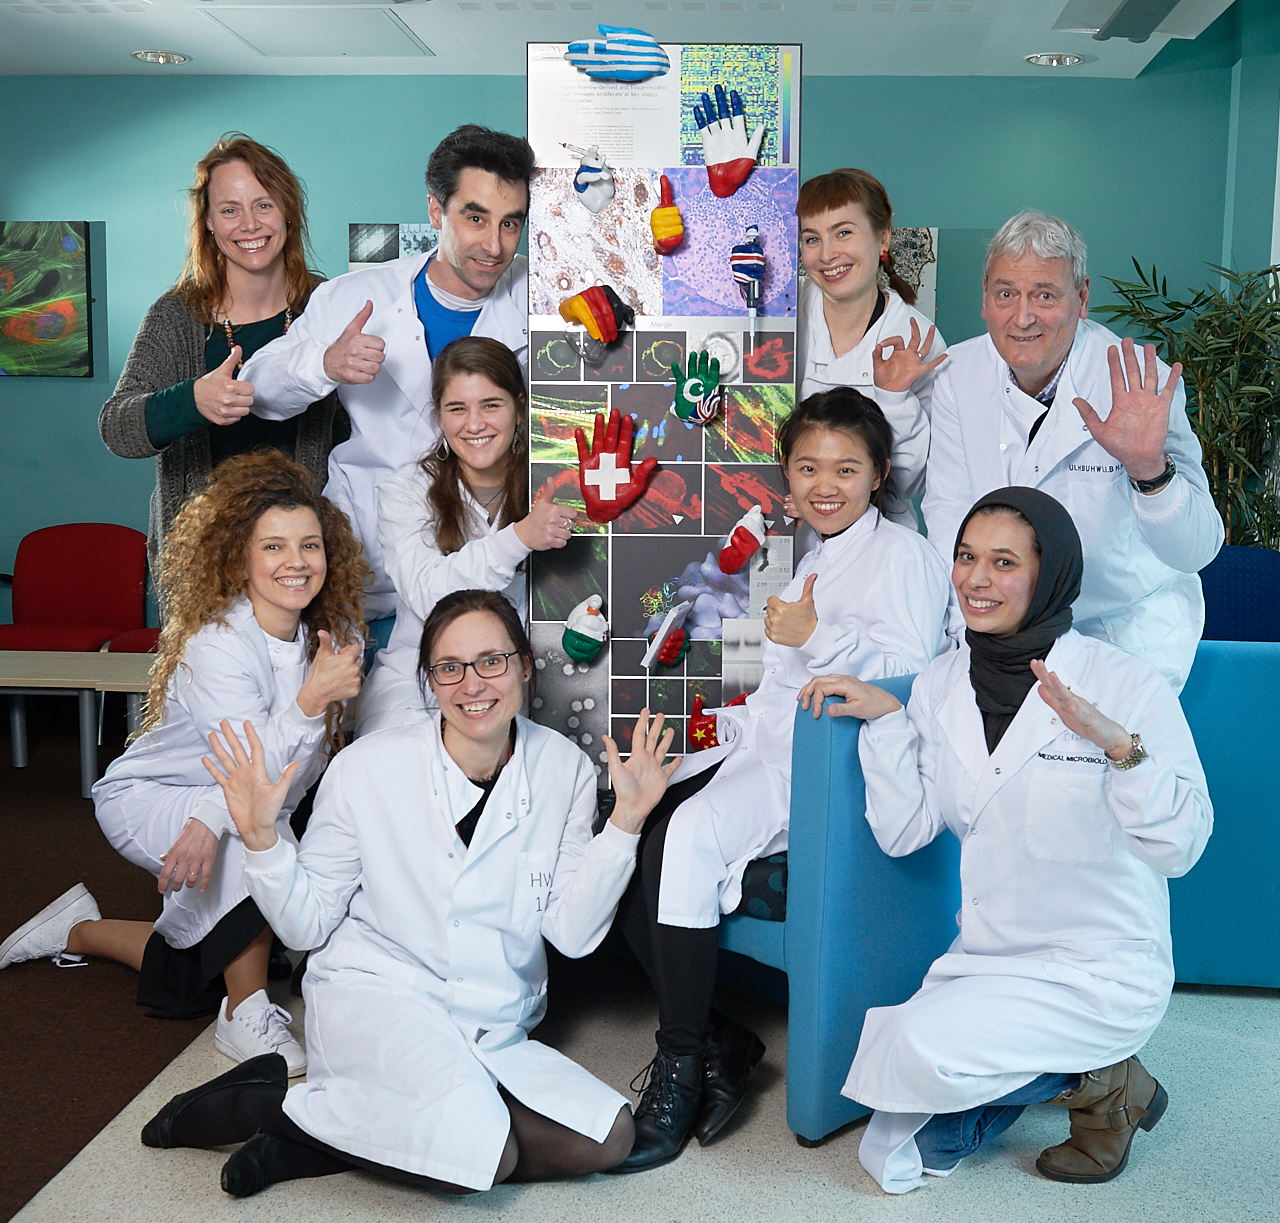 Systems Immunity Researchers with Global hands project